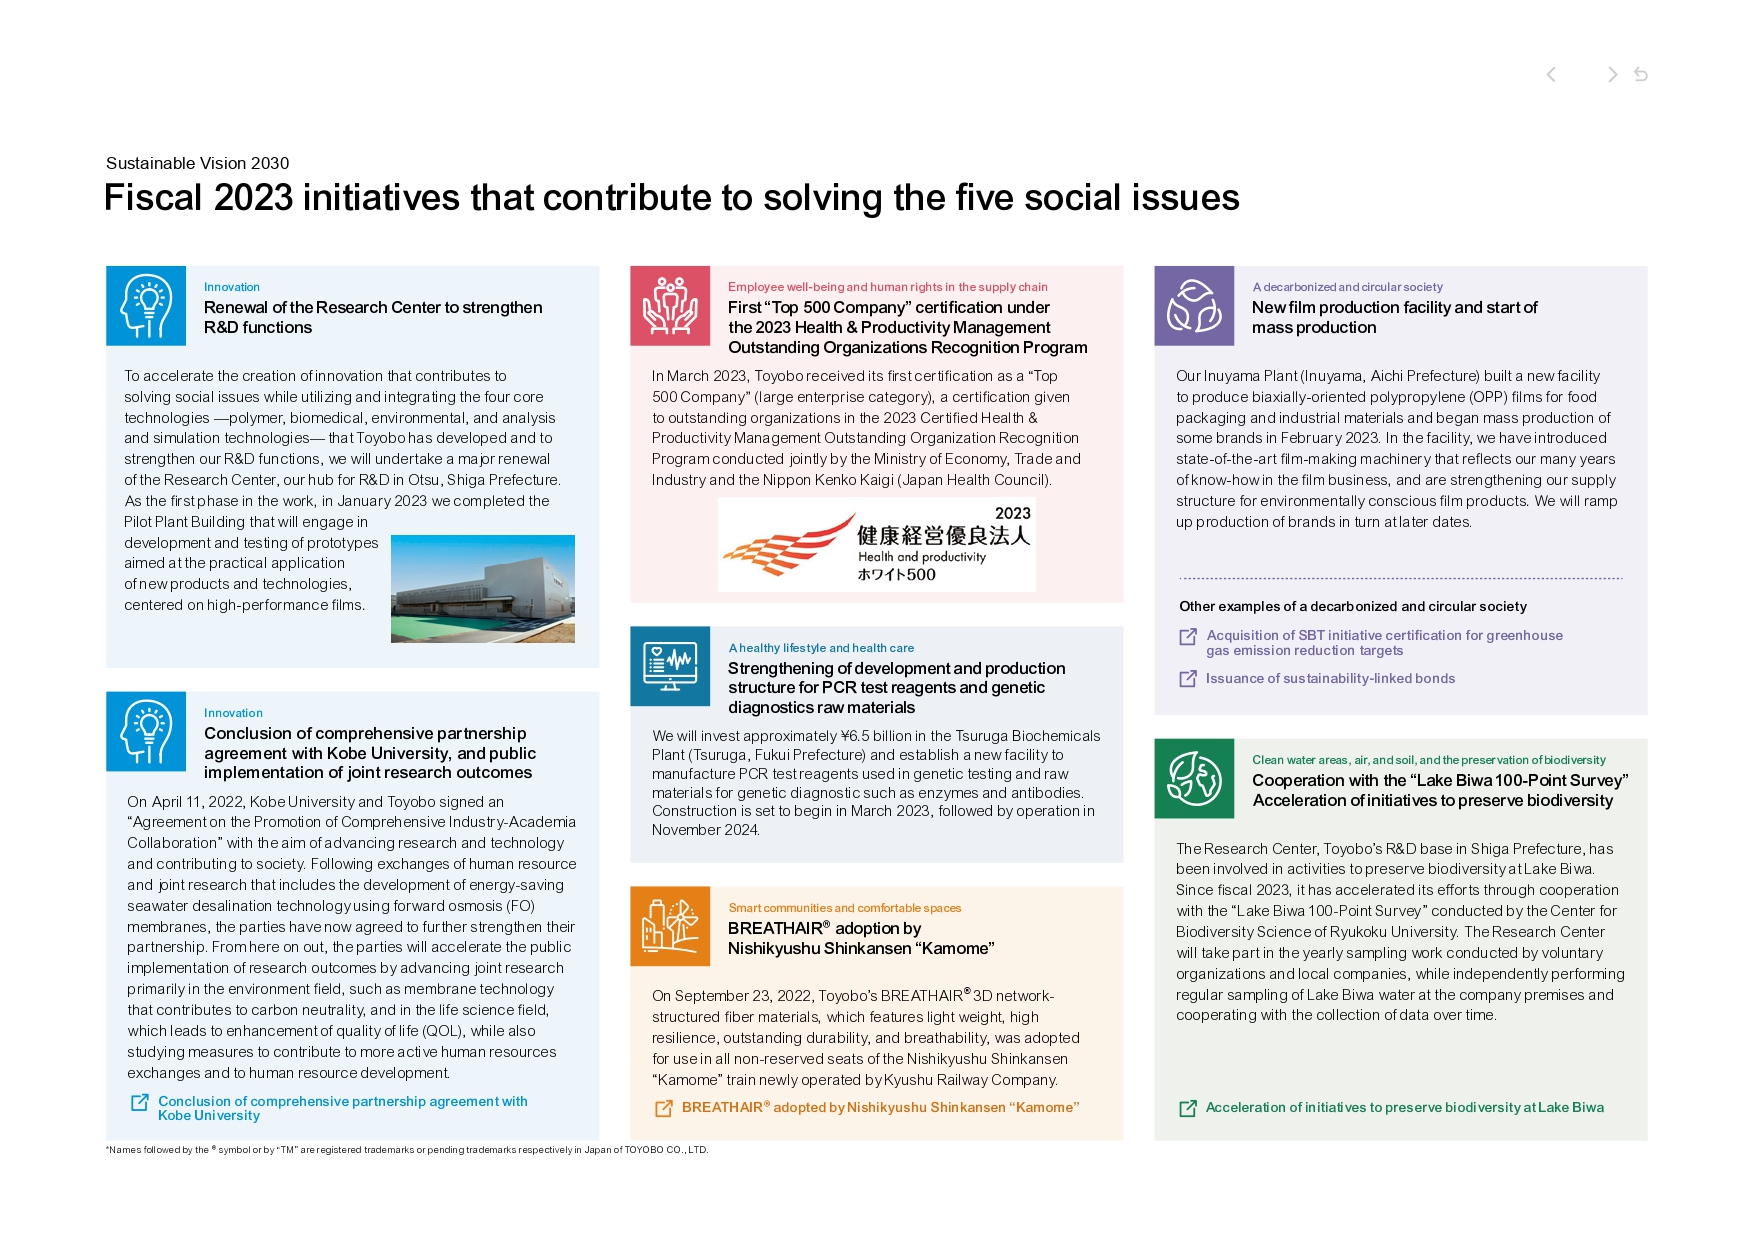 Sustainable Vision 2030 in the Integrated Report 2022